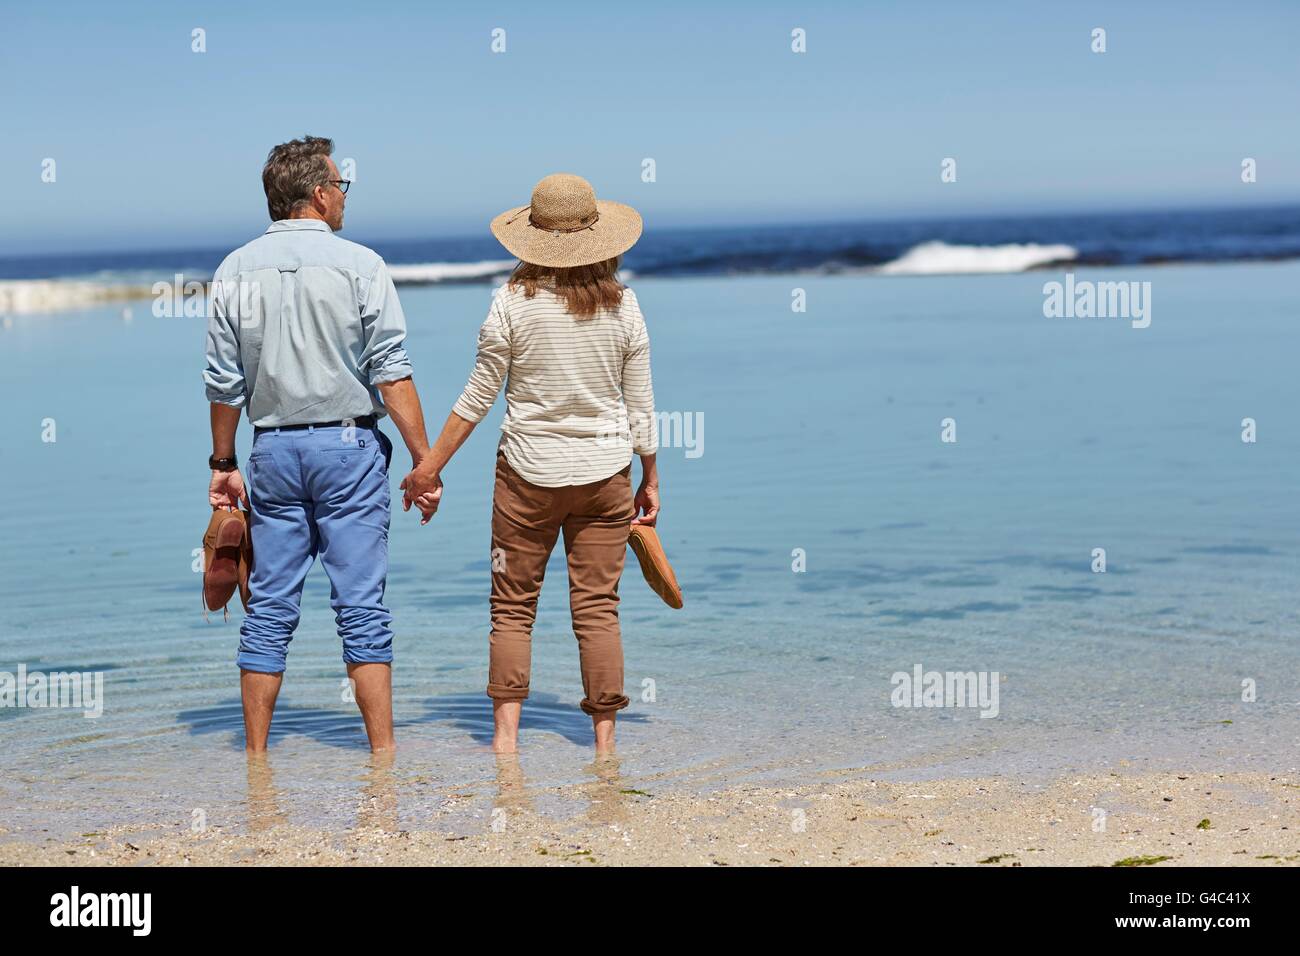 MODEL RELEASED. Senior couple holding hands, paddling in the sea. Stock Photo